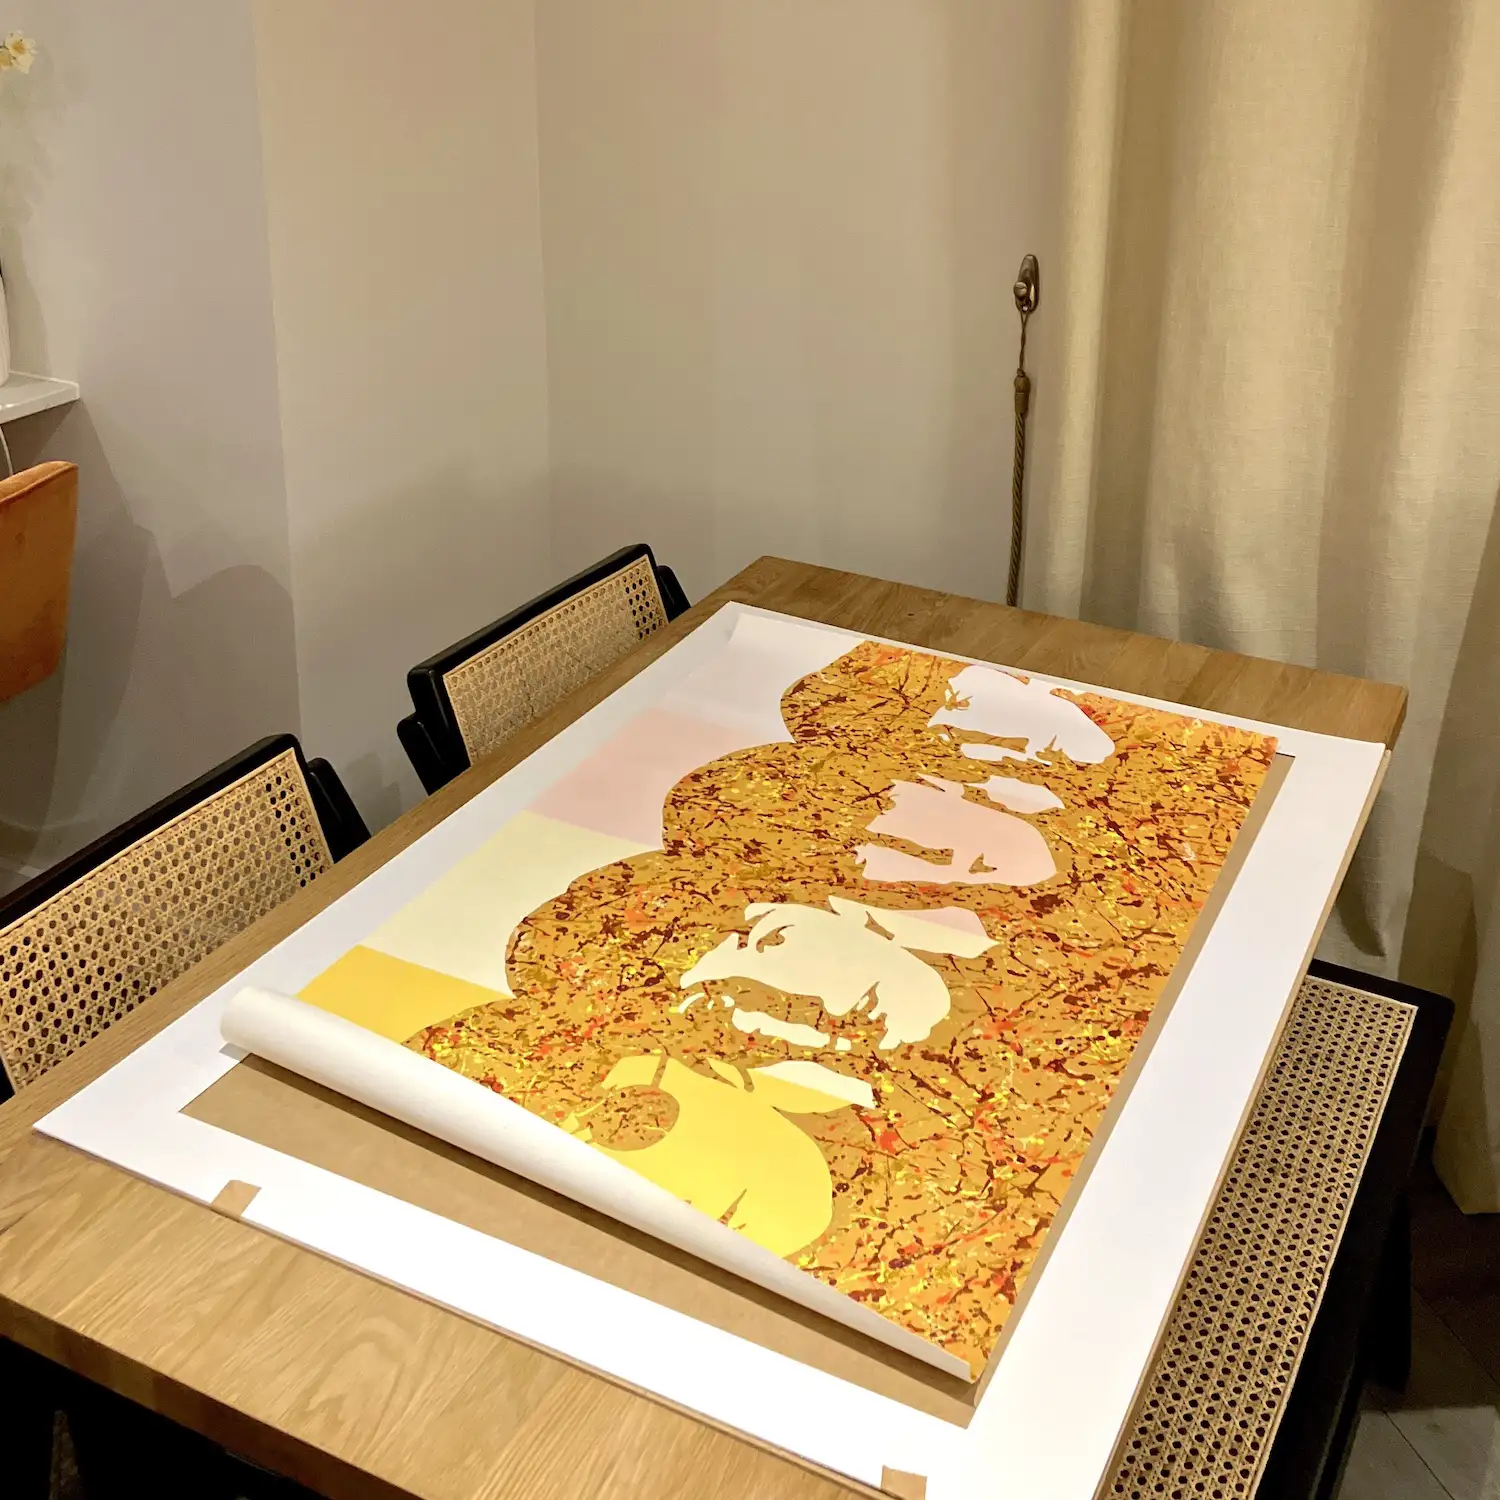 Framing your art using a mount